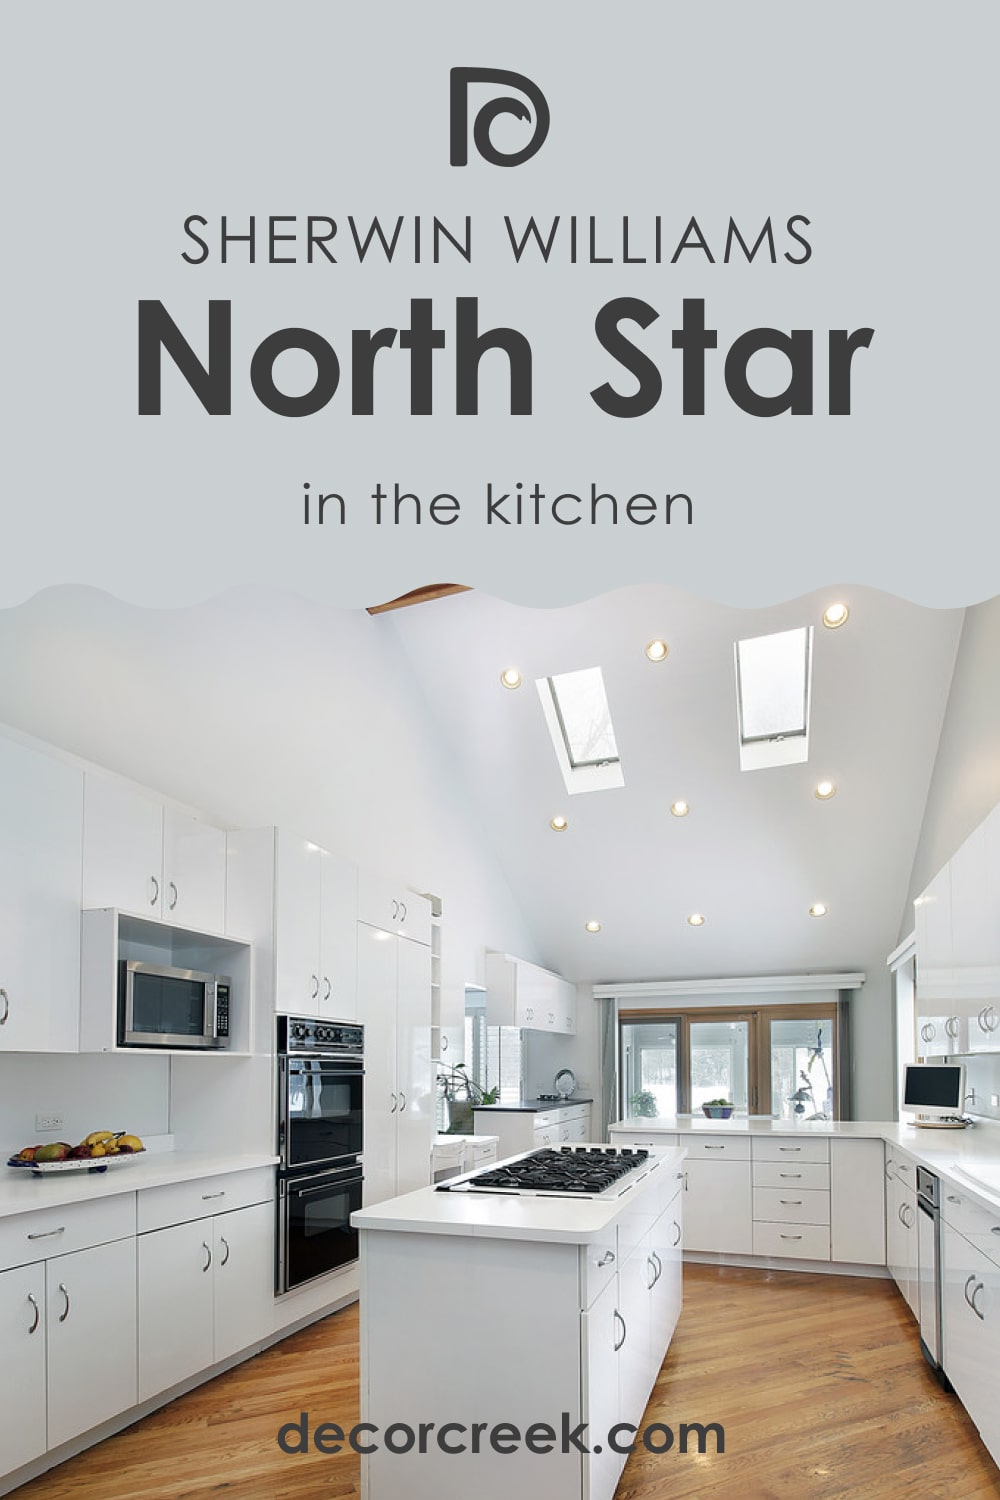 North Star SW-6246 for the Kitchen